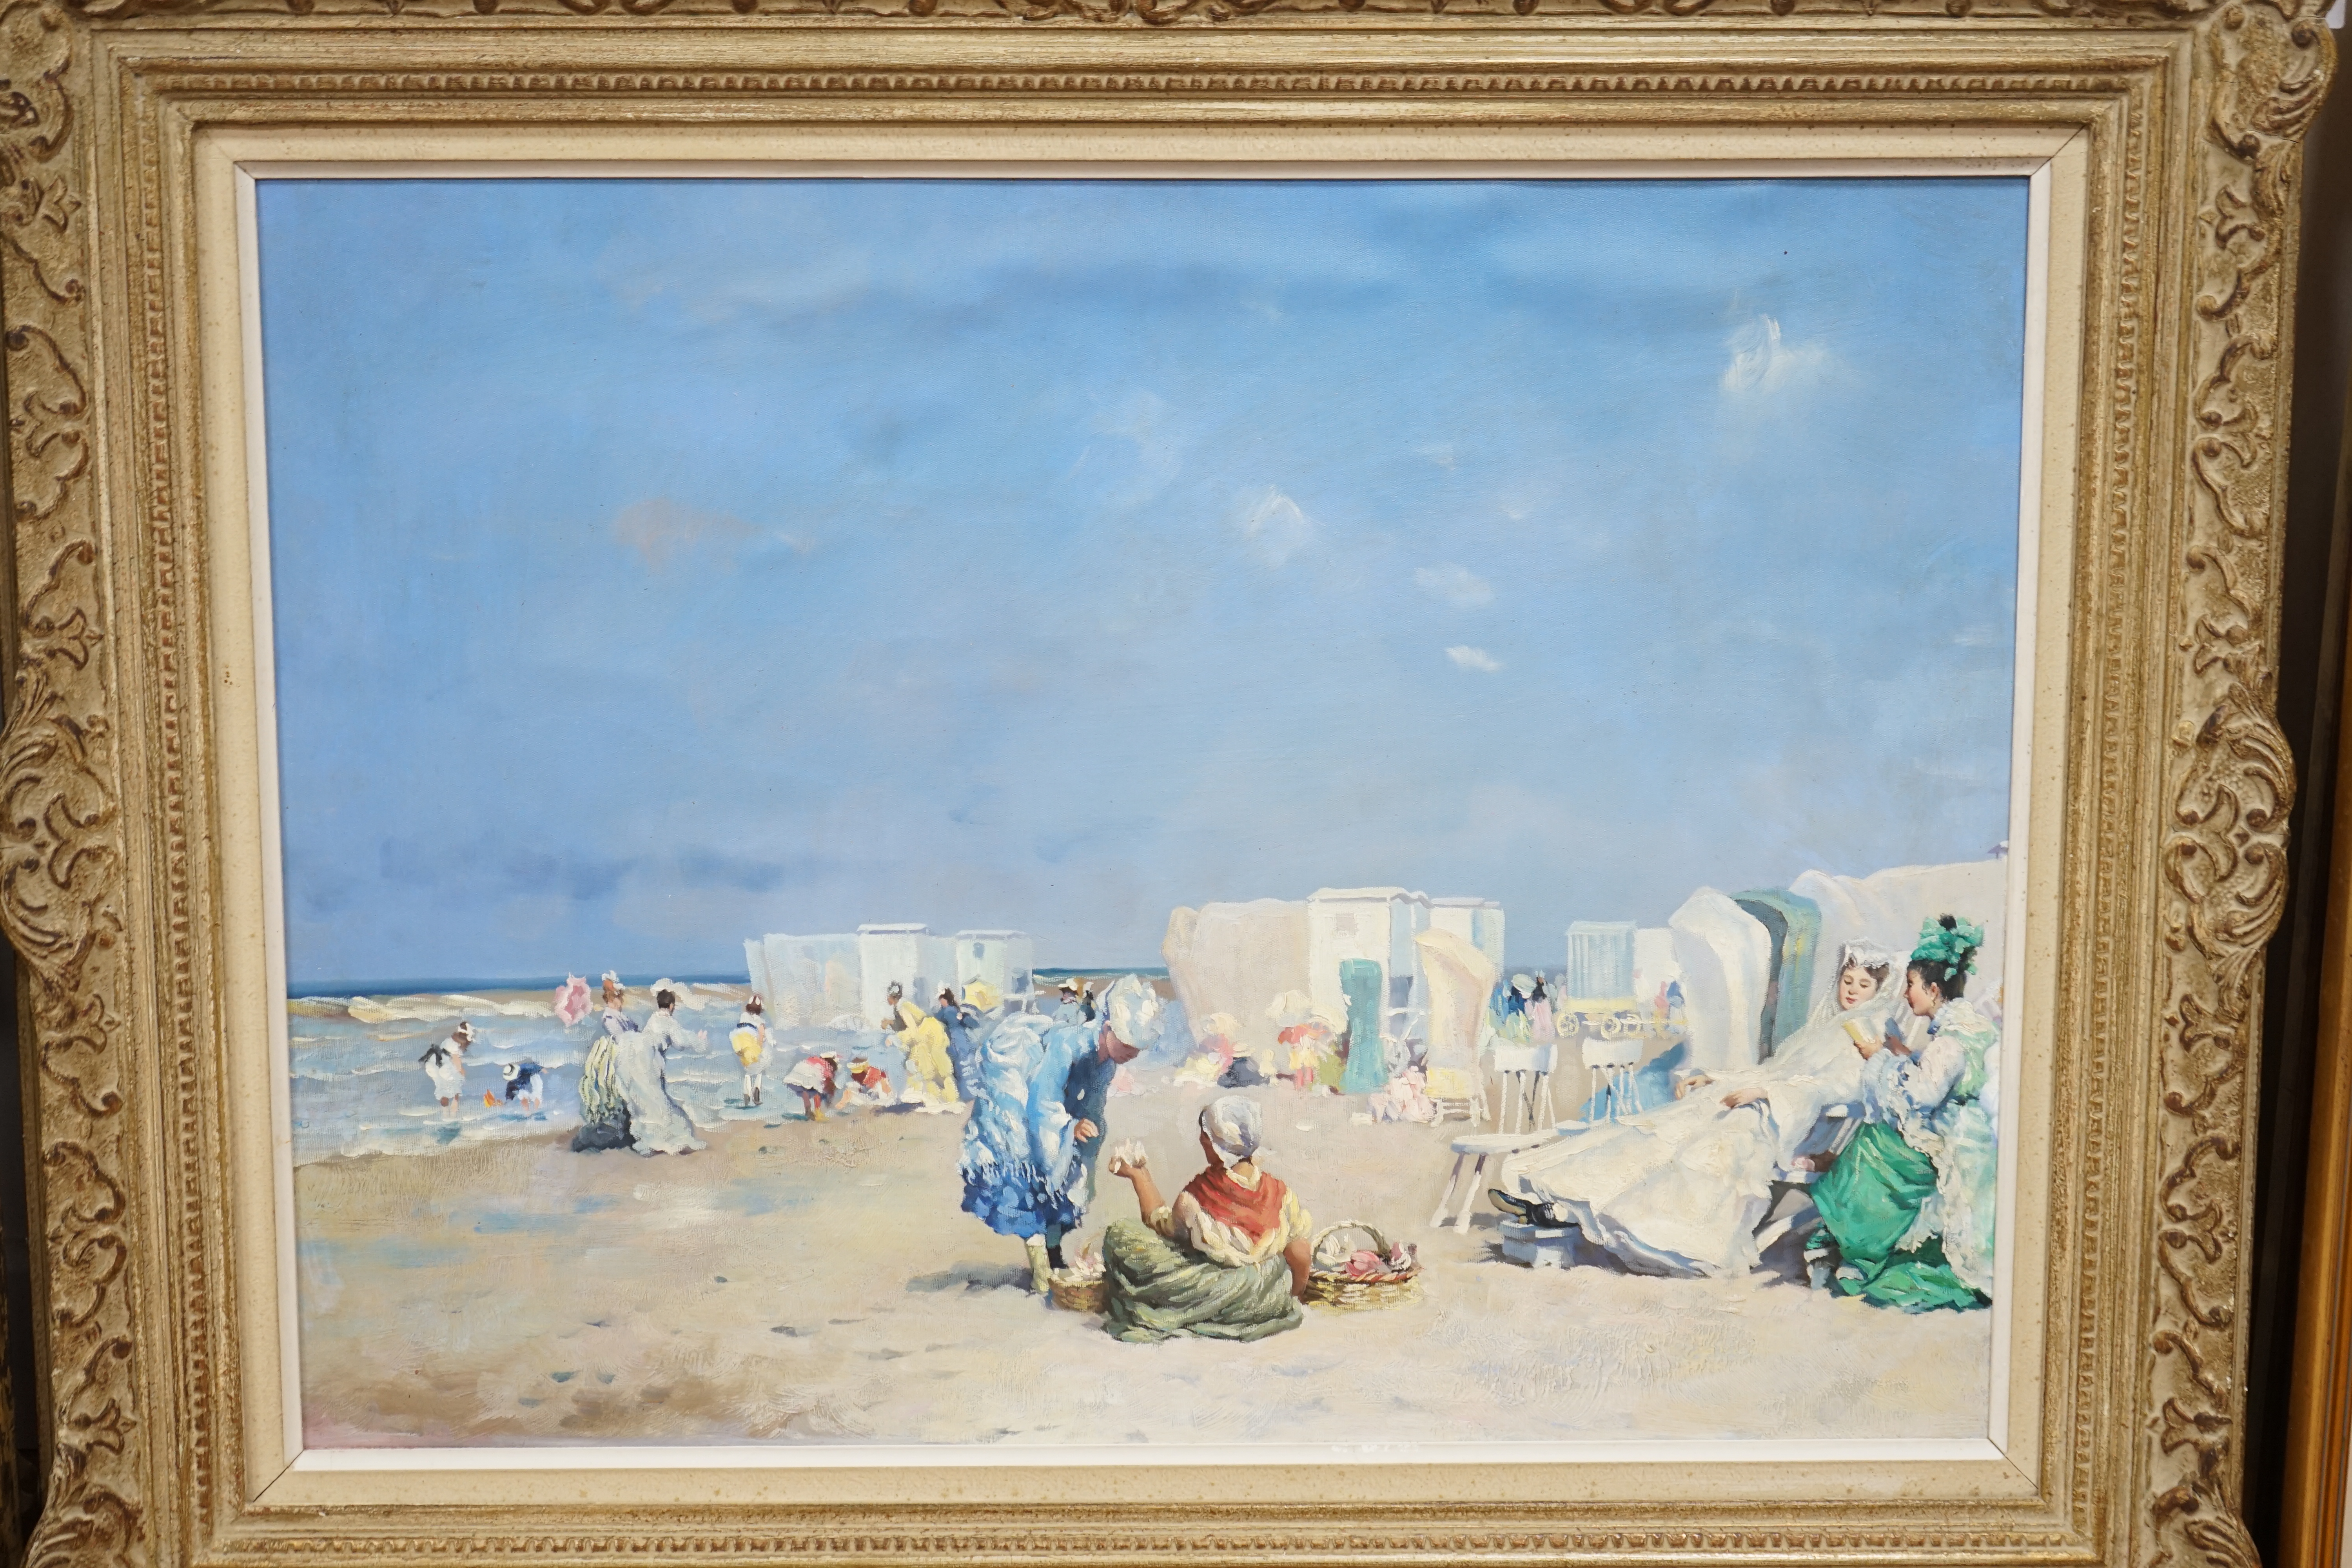 Modern British, oil on canvas, Figures on a beach, unsigned, 50 x 66cm. Condition - good, would benefit from a clean